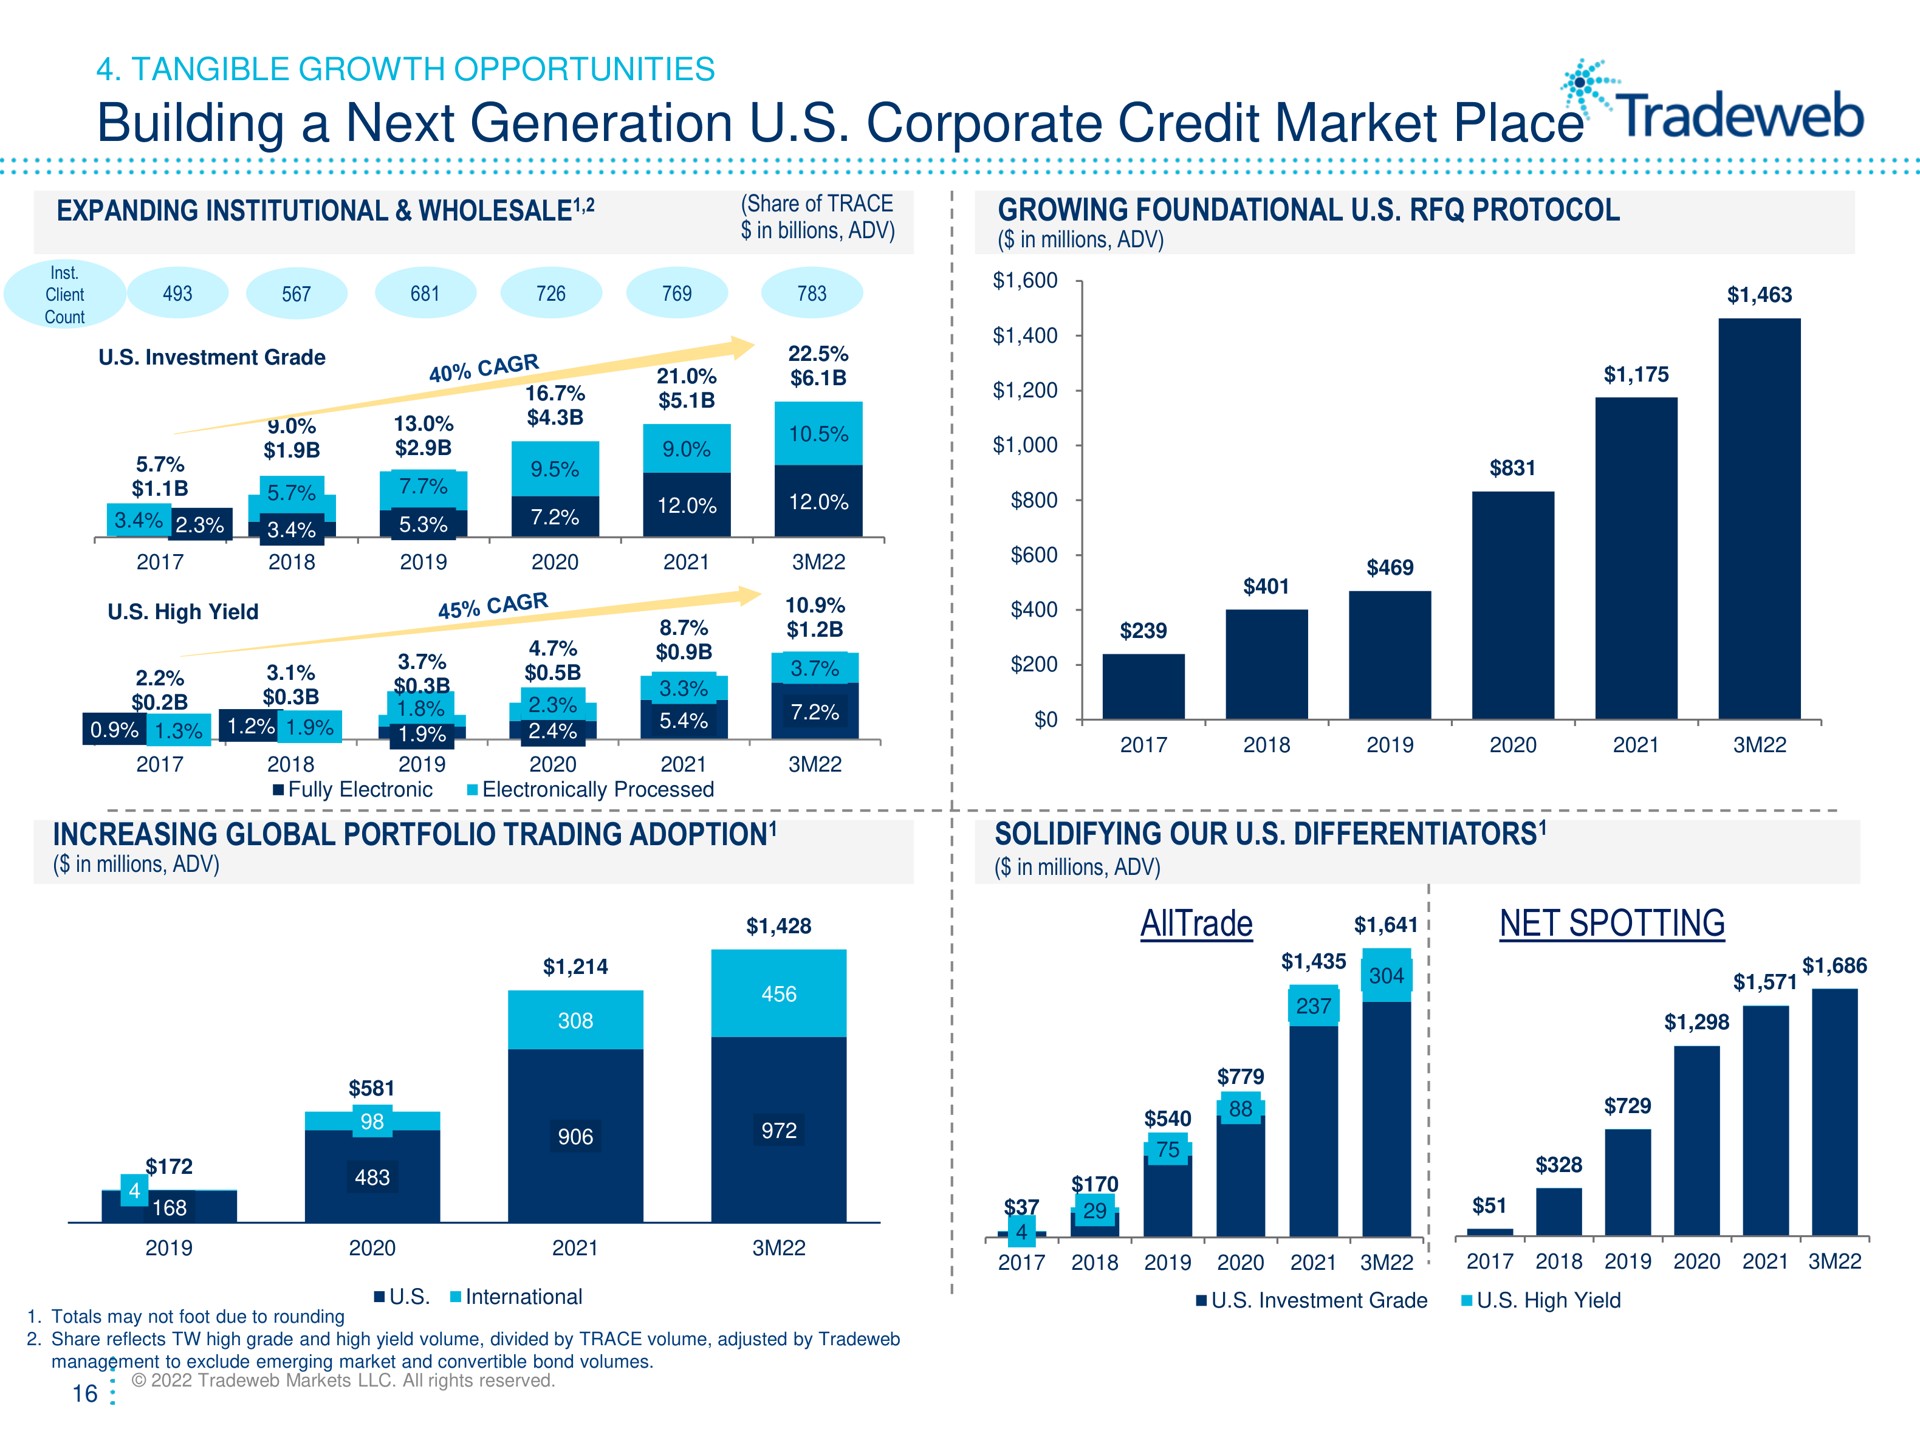 building a next generation corporate credit market place net spotting tangible growth opportunities expanding institutional wholesale client share of trace high growing foundational protocol sans increasing global portfolio trading adoption solidifying our differentiators shee | Tradeweb